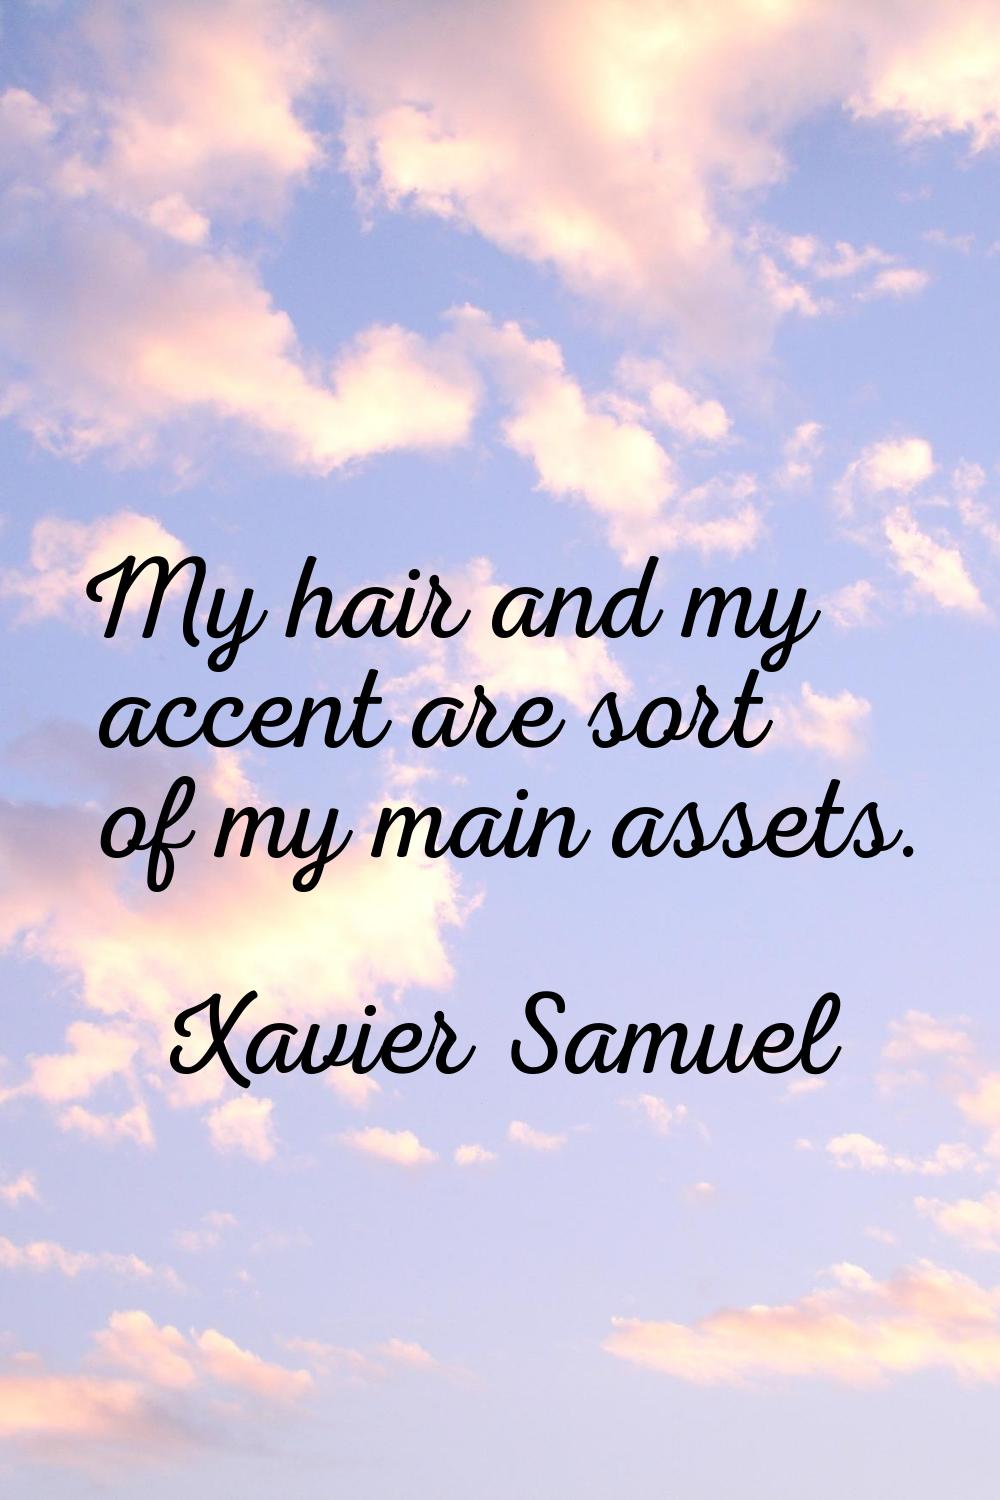 My hair and my accent are sort of my main assets.